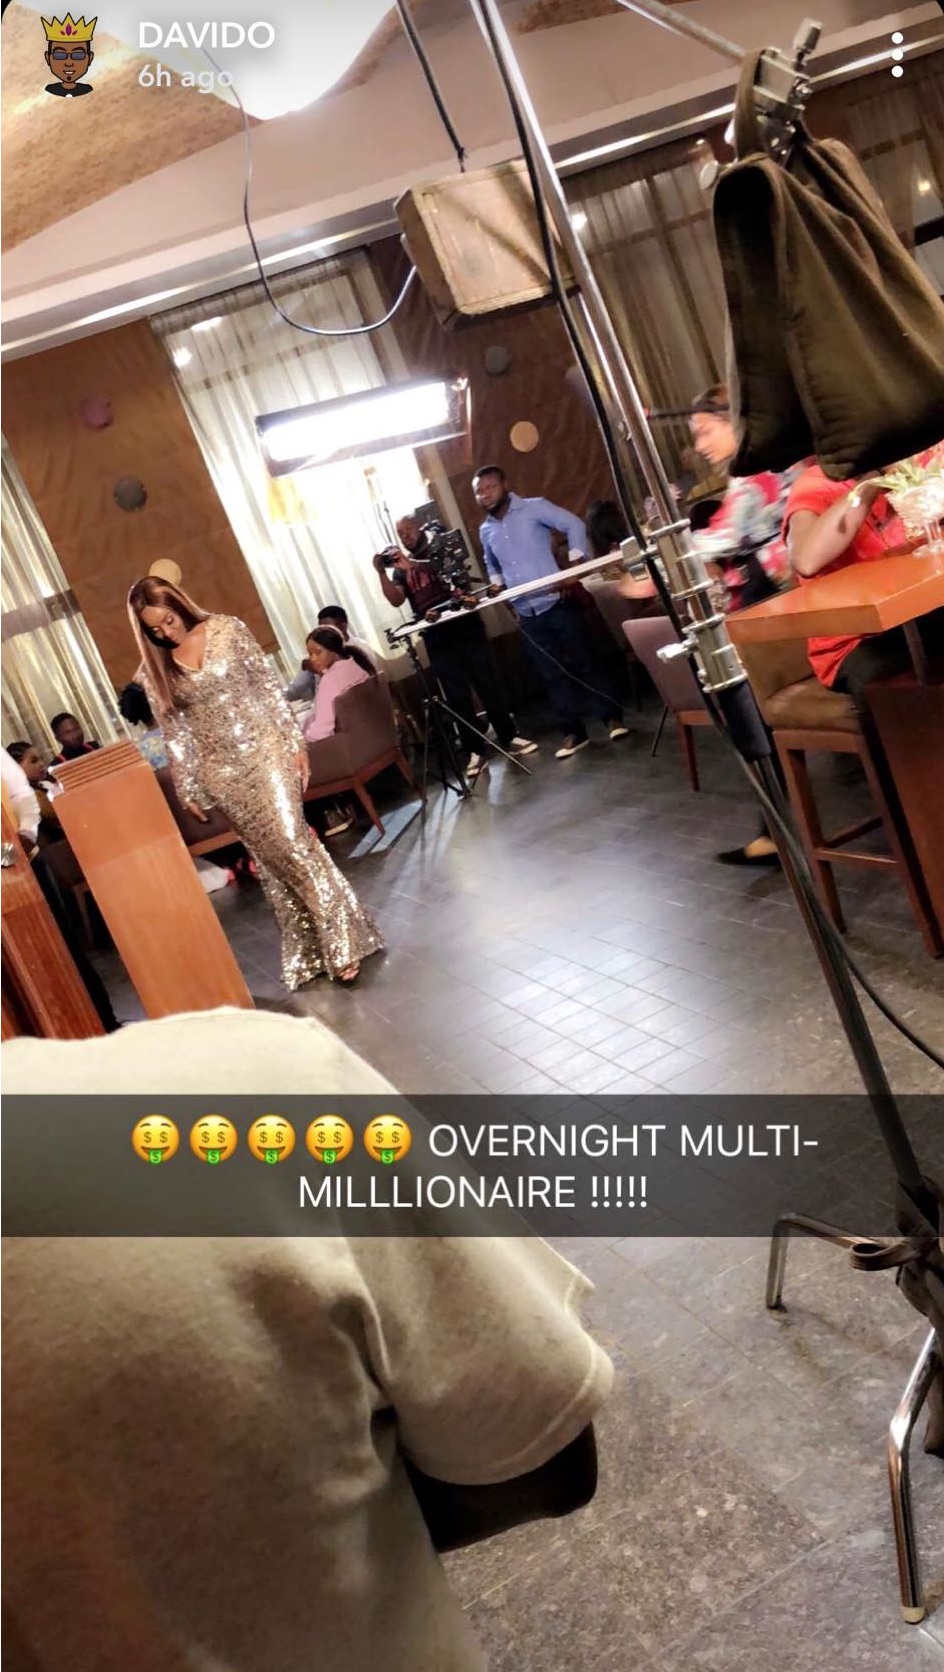 Davido celebrates as his lover, Chioma becomes multi-millionaire after endorsement deal. (Photos)